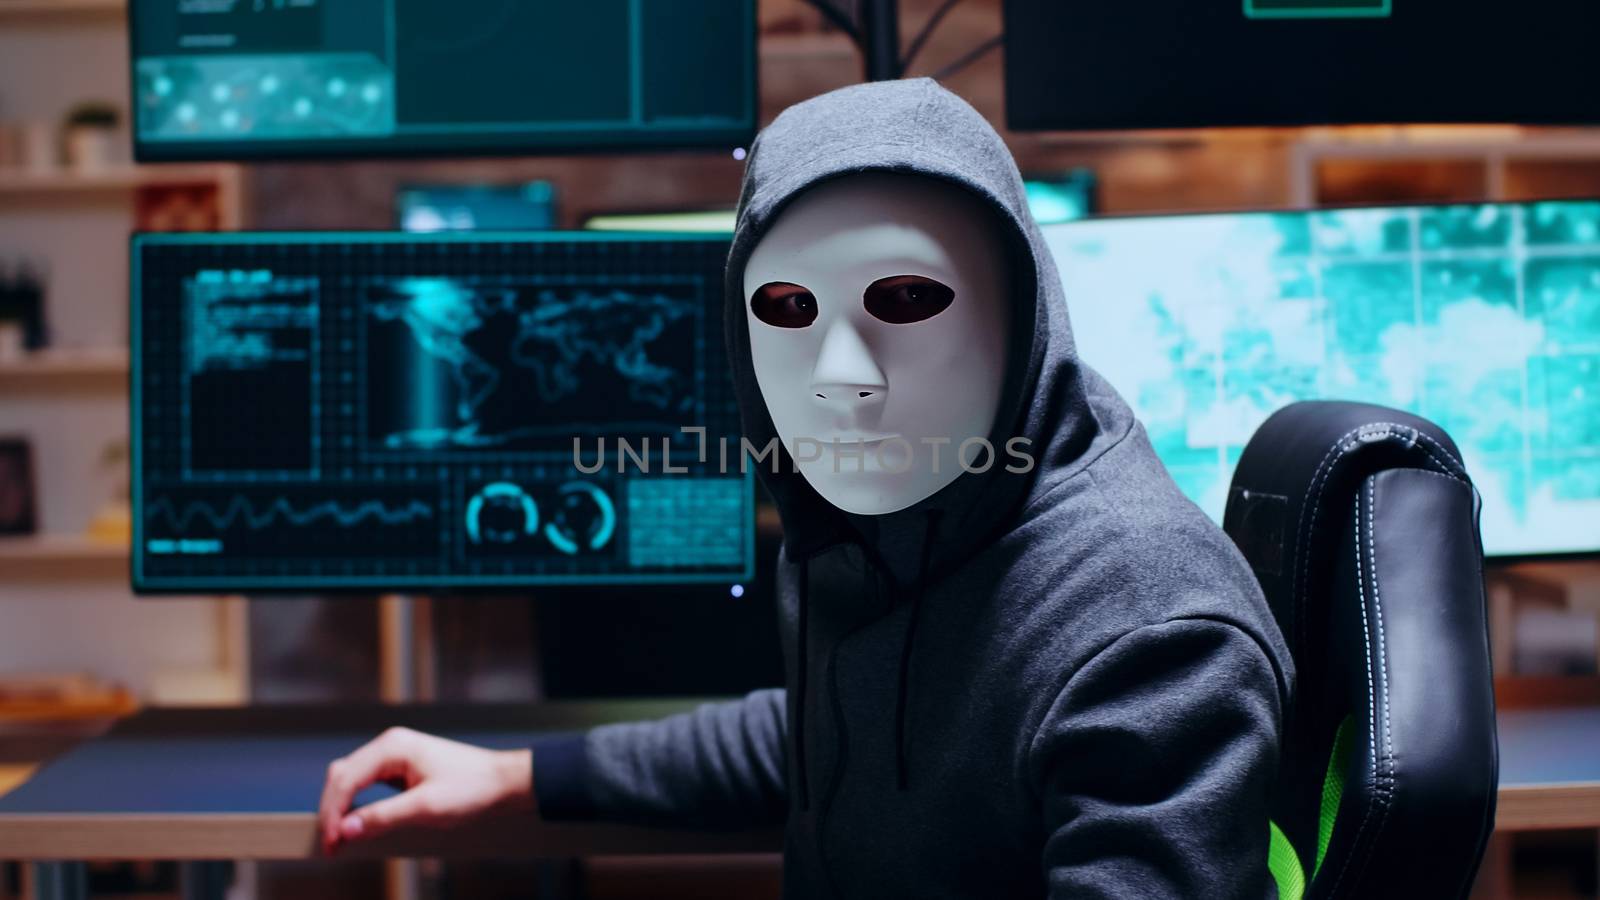 Wanted cyber criminal wearing a white mask by DCStudio